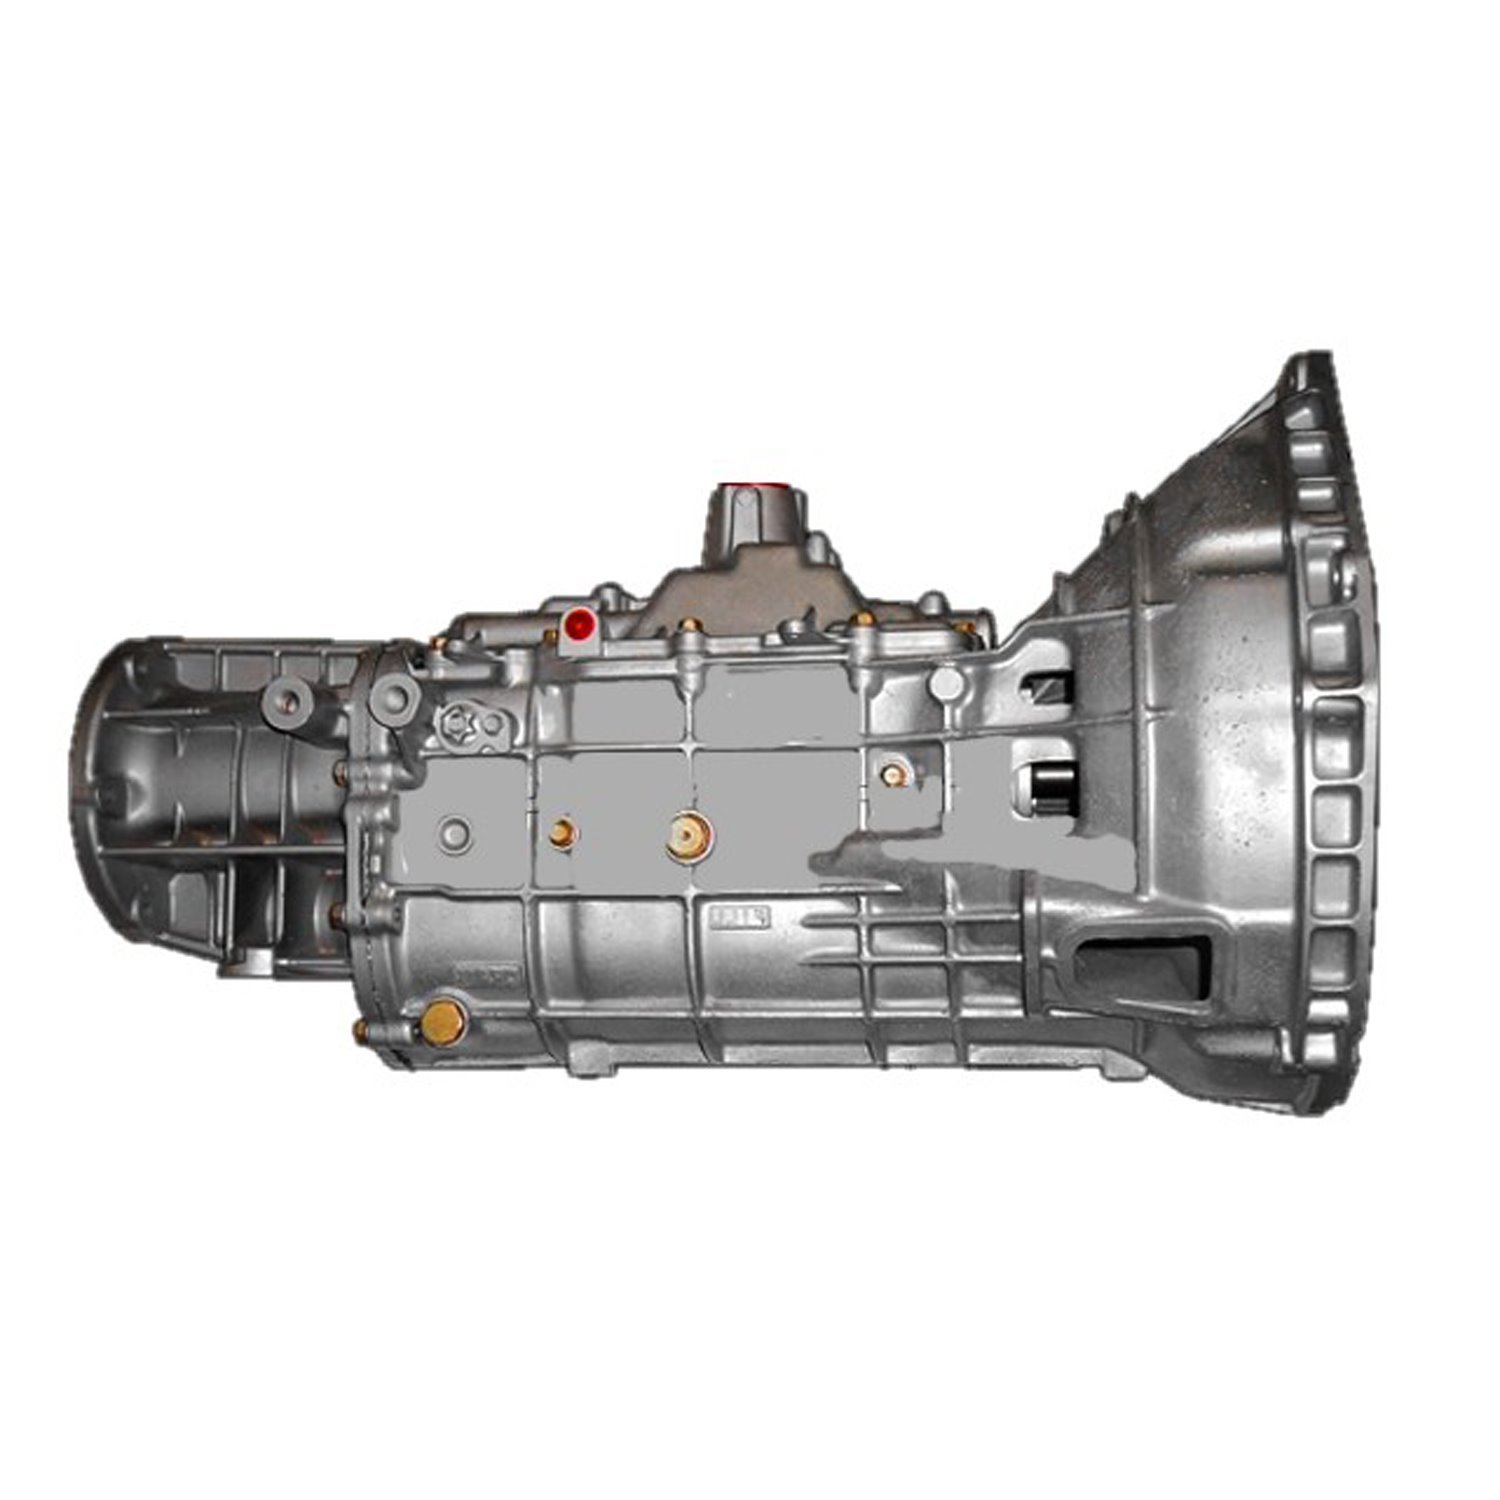 Remanufactured Manual Transmission for Ford 88-92 F150 &